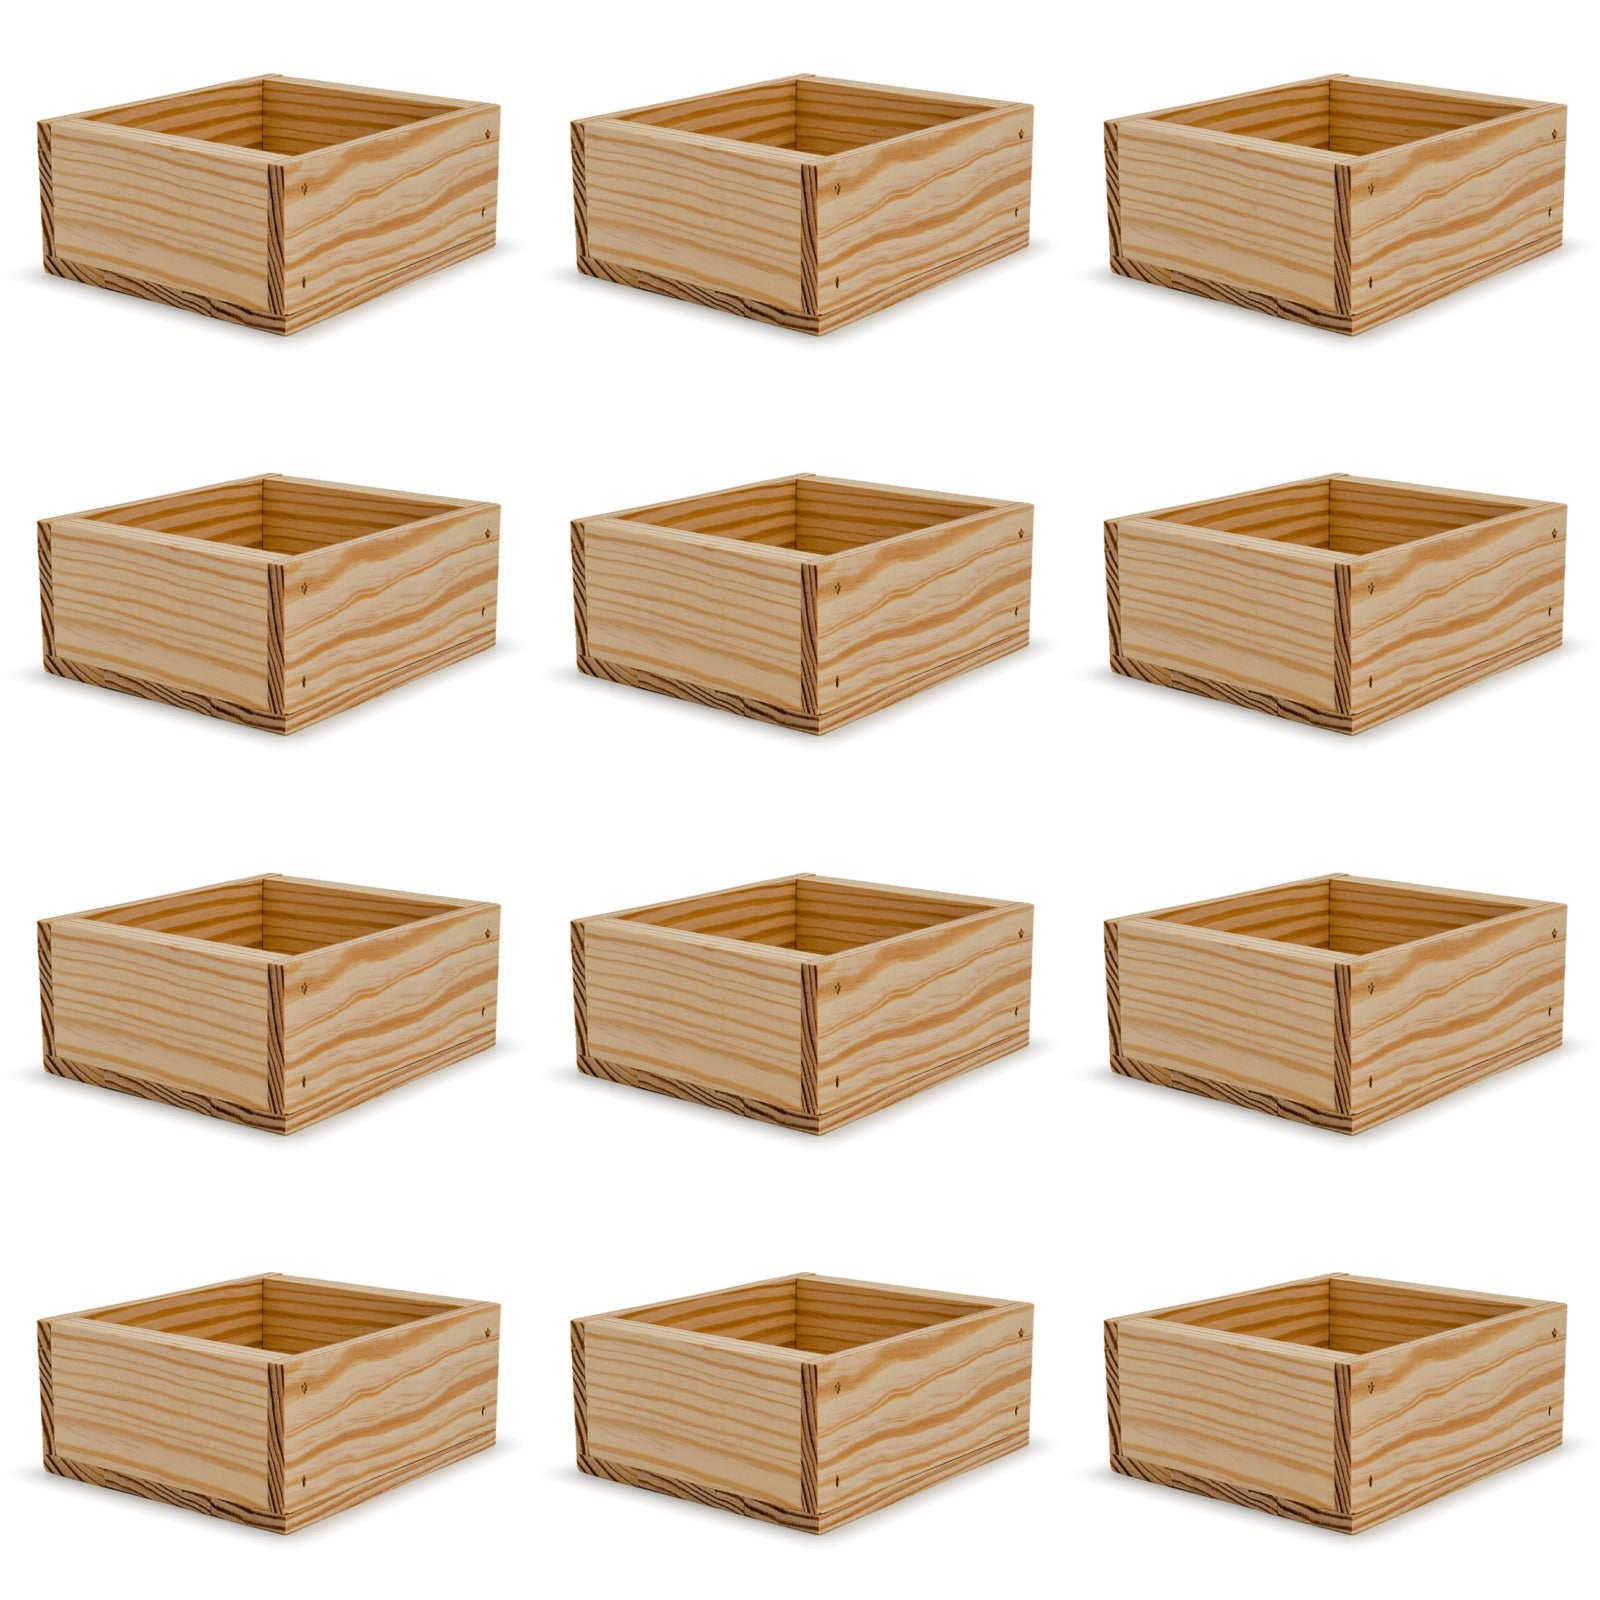 12 Small wooden crates 6x5.5x2.75